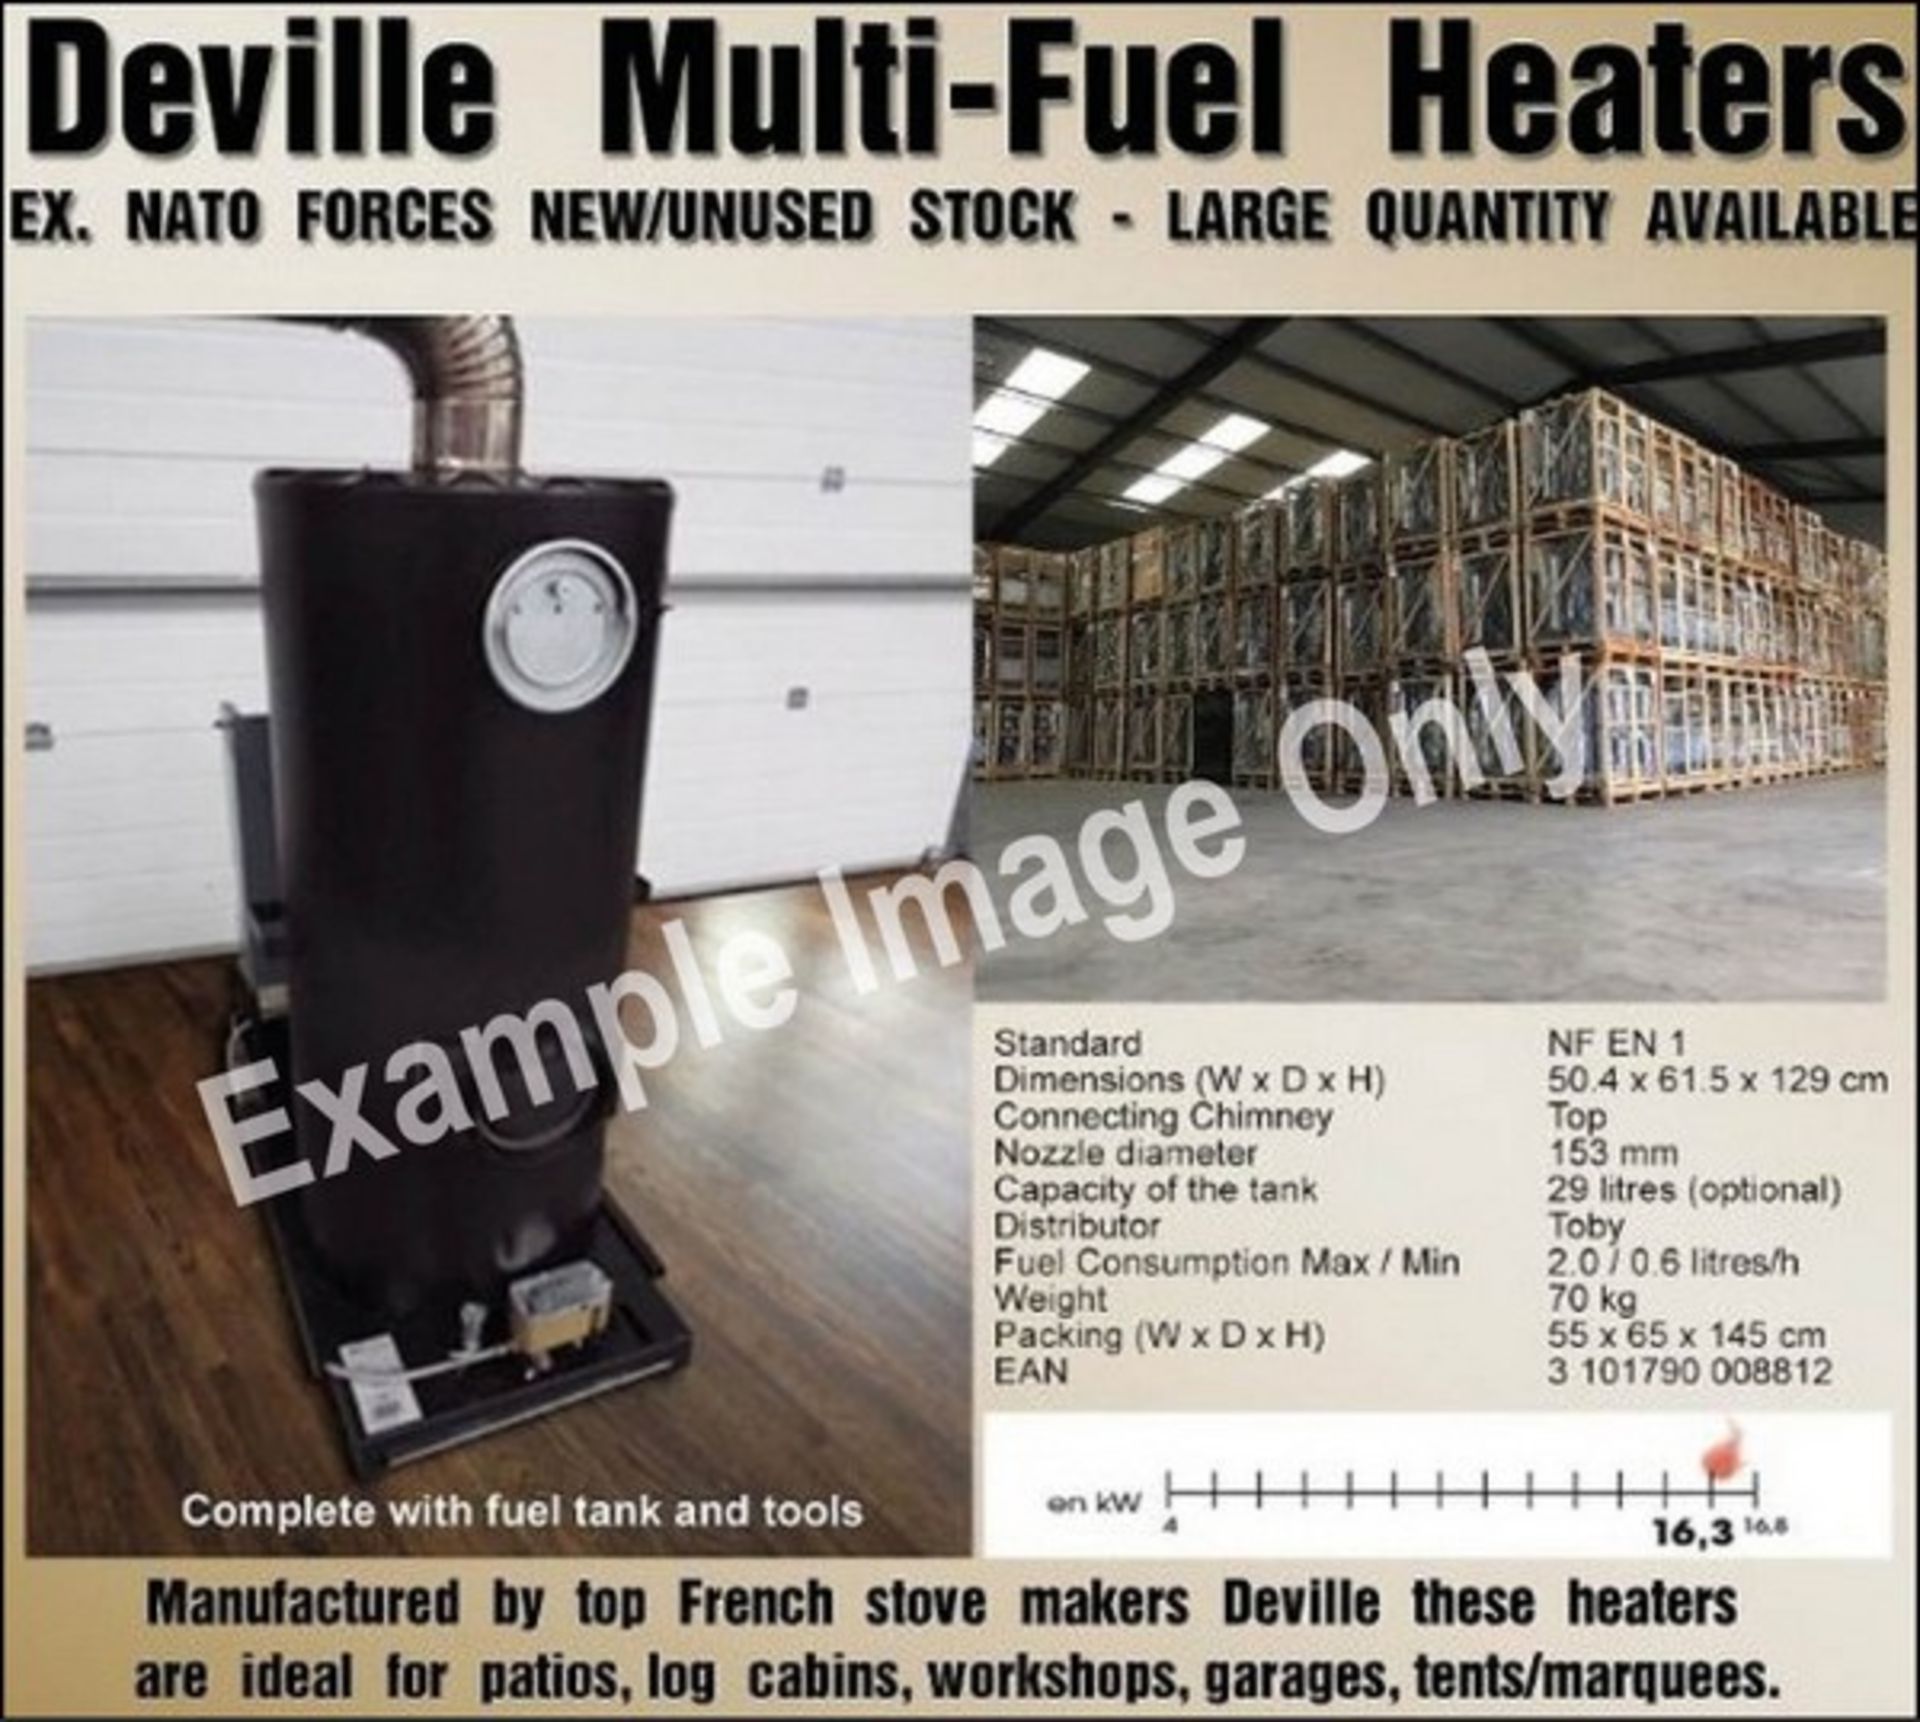 2 x DEVILLE multi-fuel heaters on pallet.. Image example only.